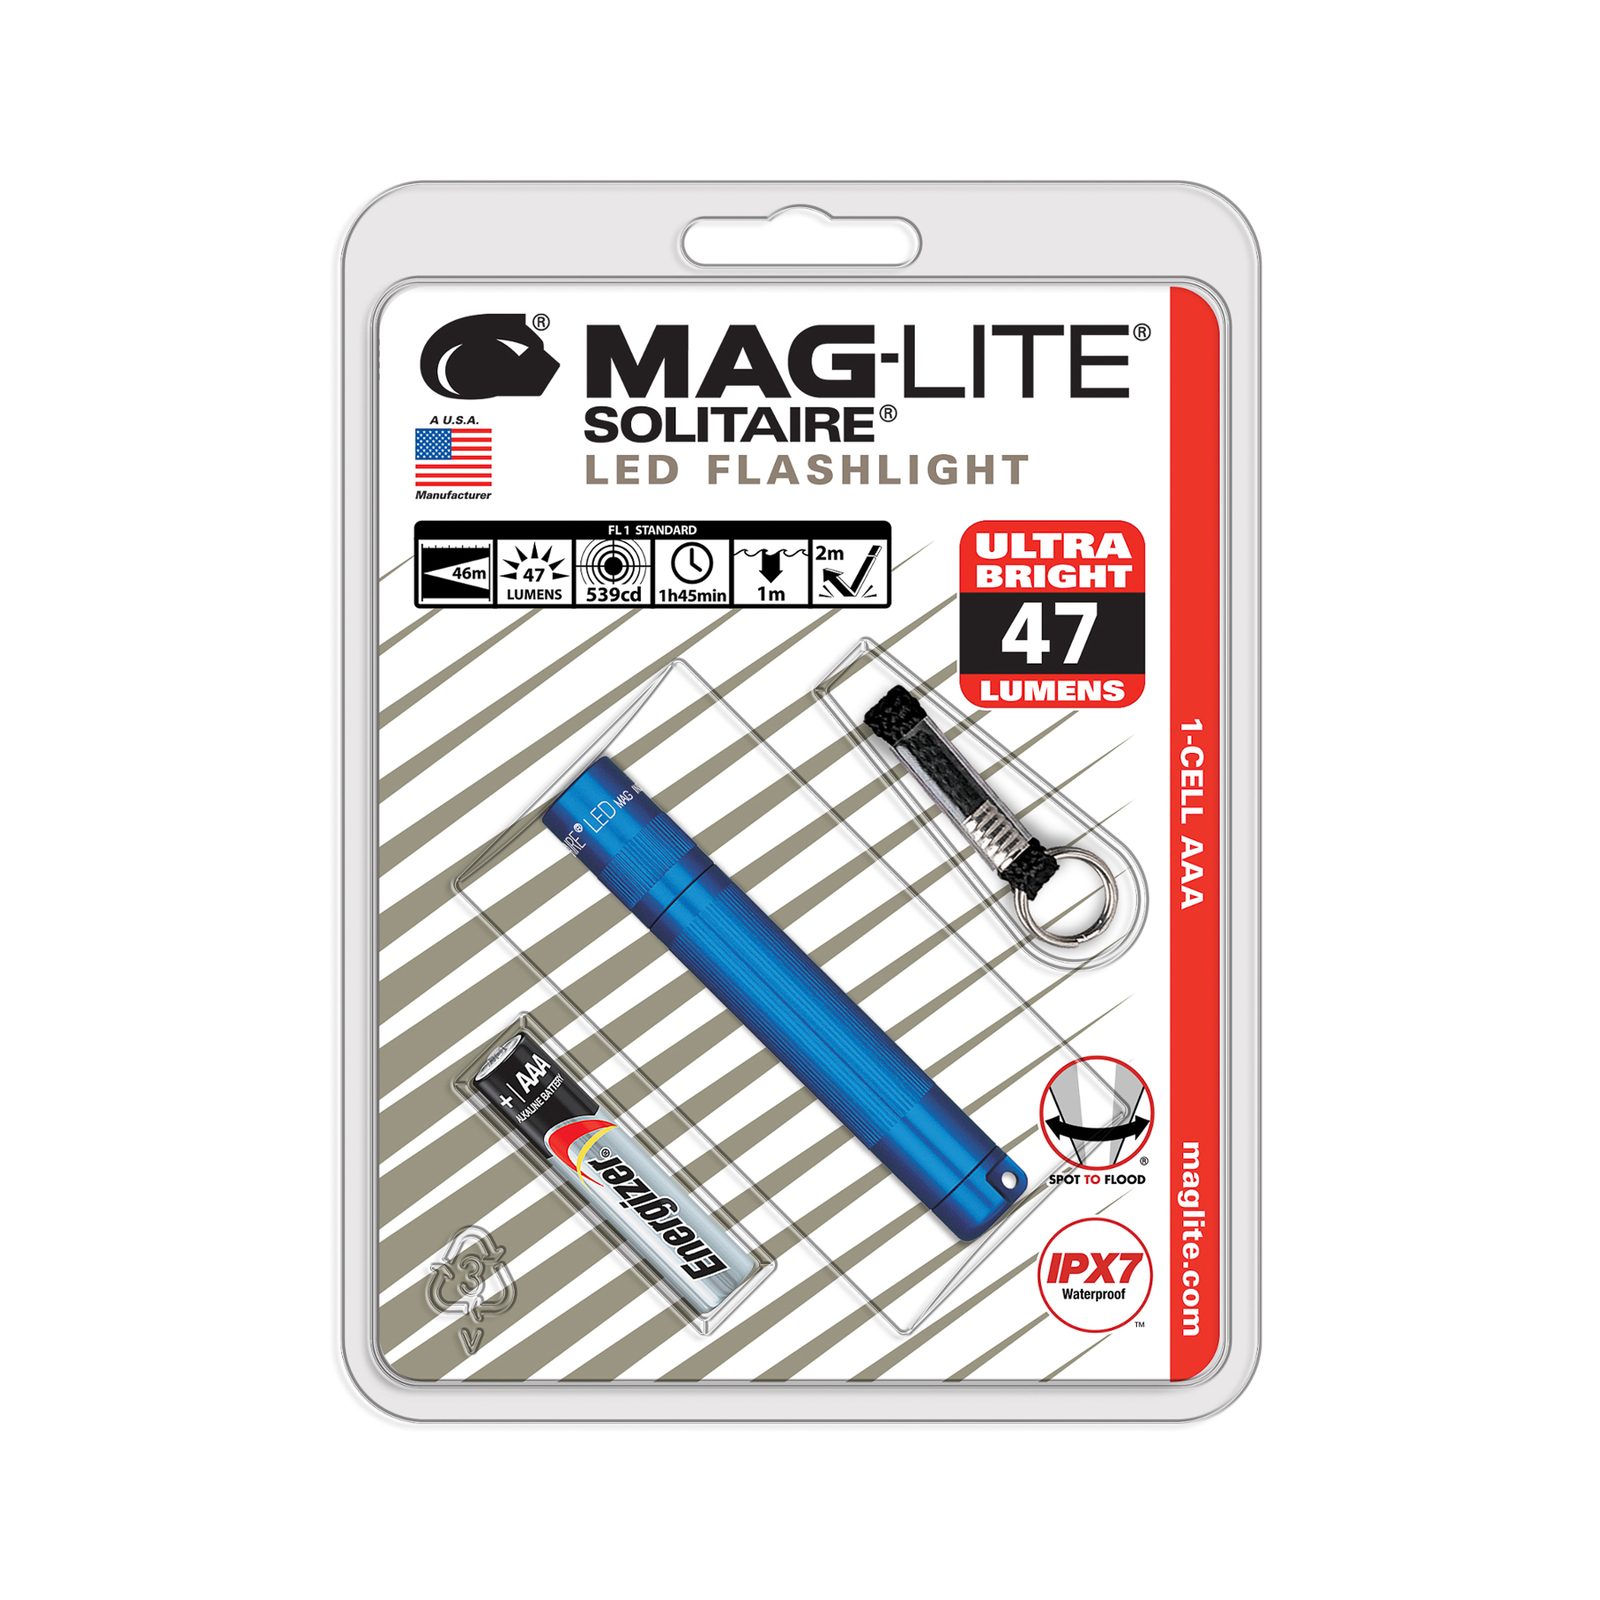 Maglite LED фенер Solitaire, 1 клетка AAA, син